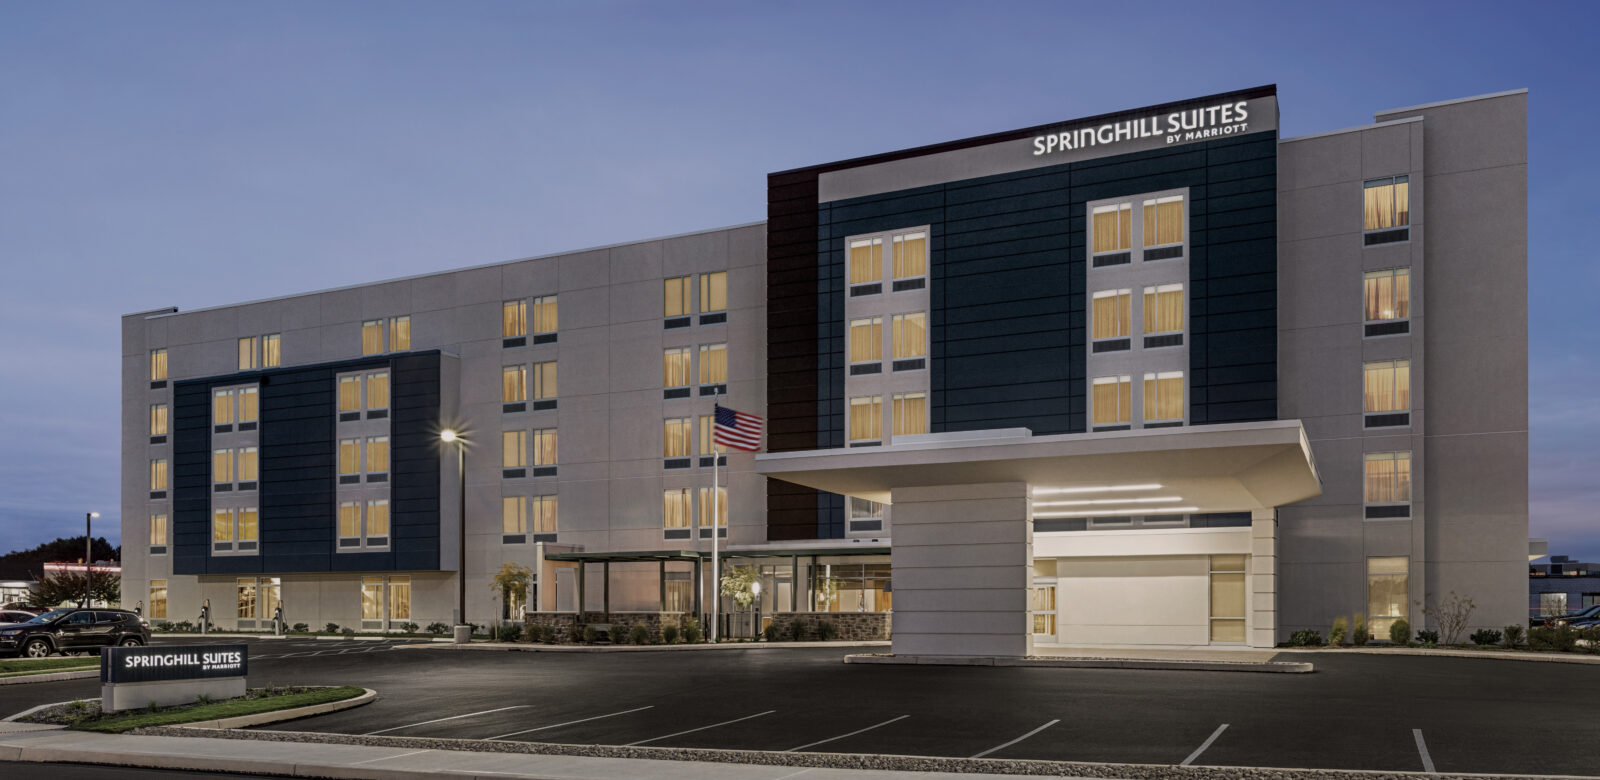 Exterior view of a Springhill Suites in the evening